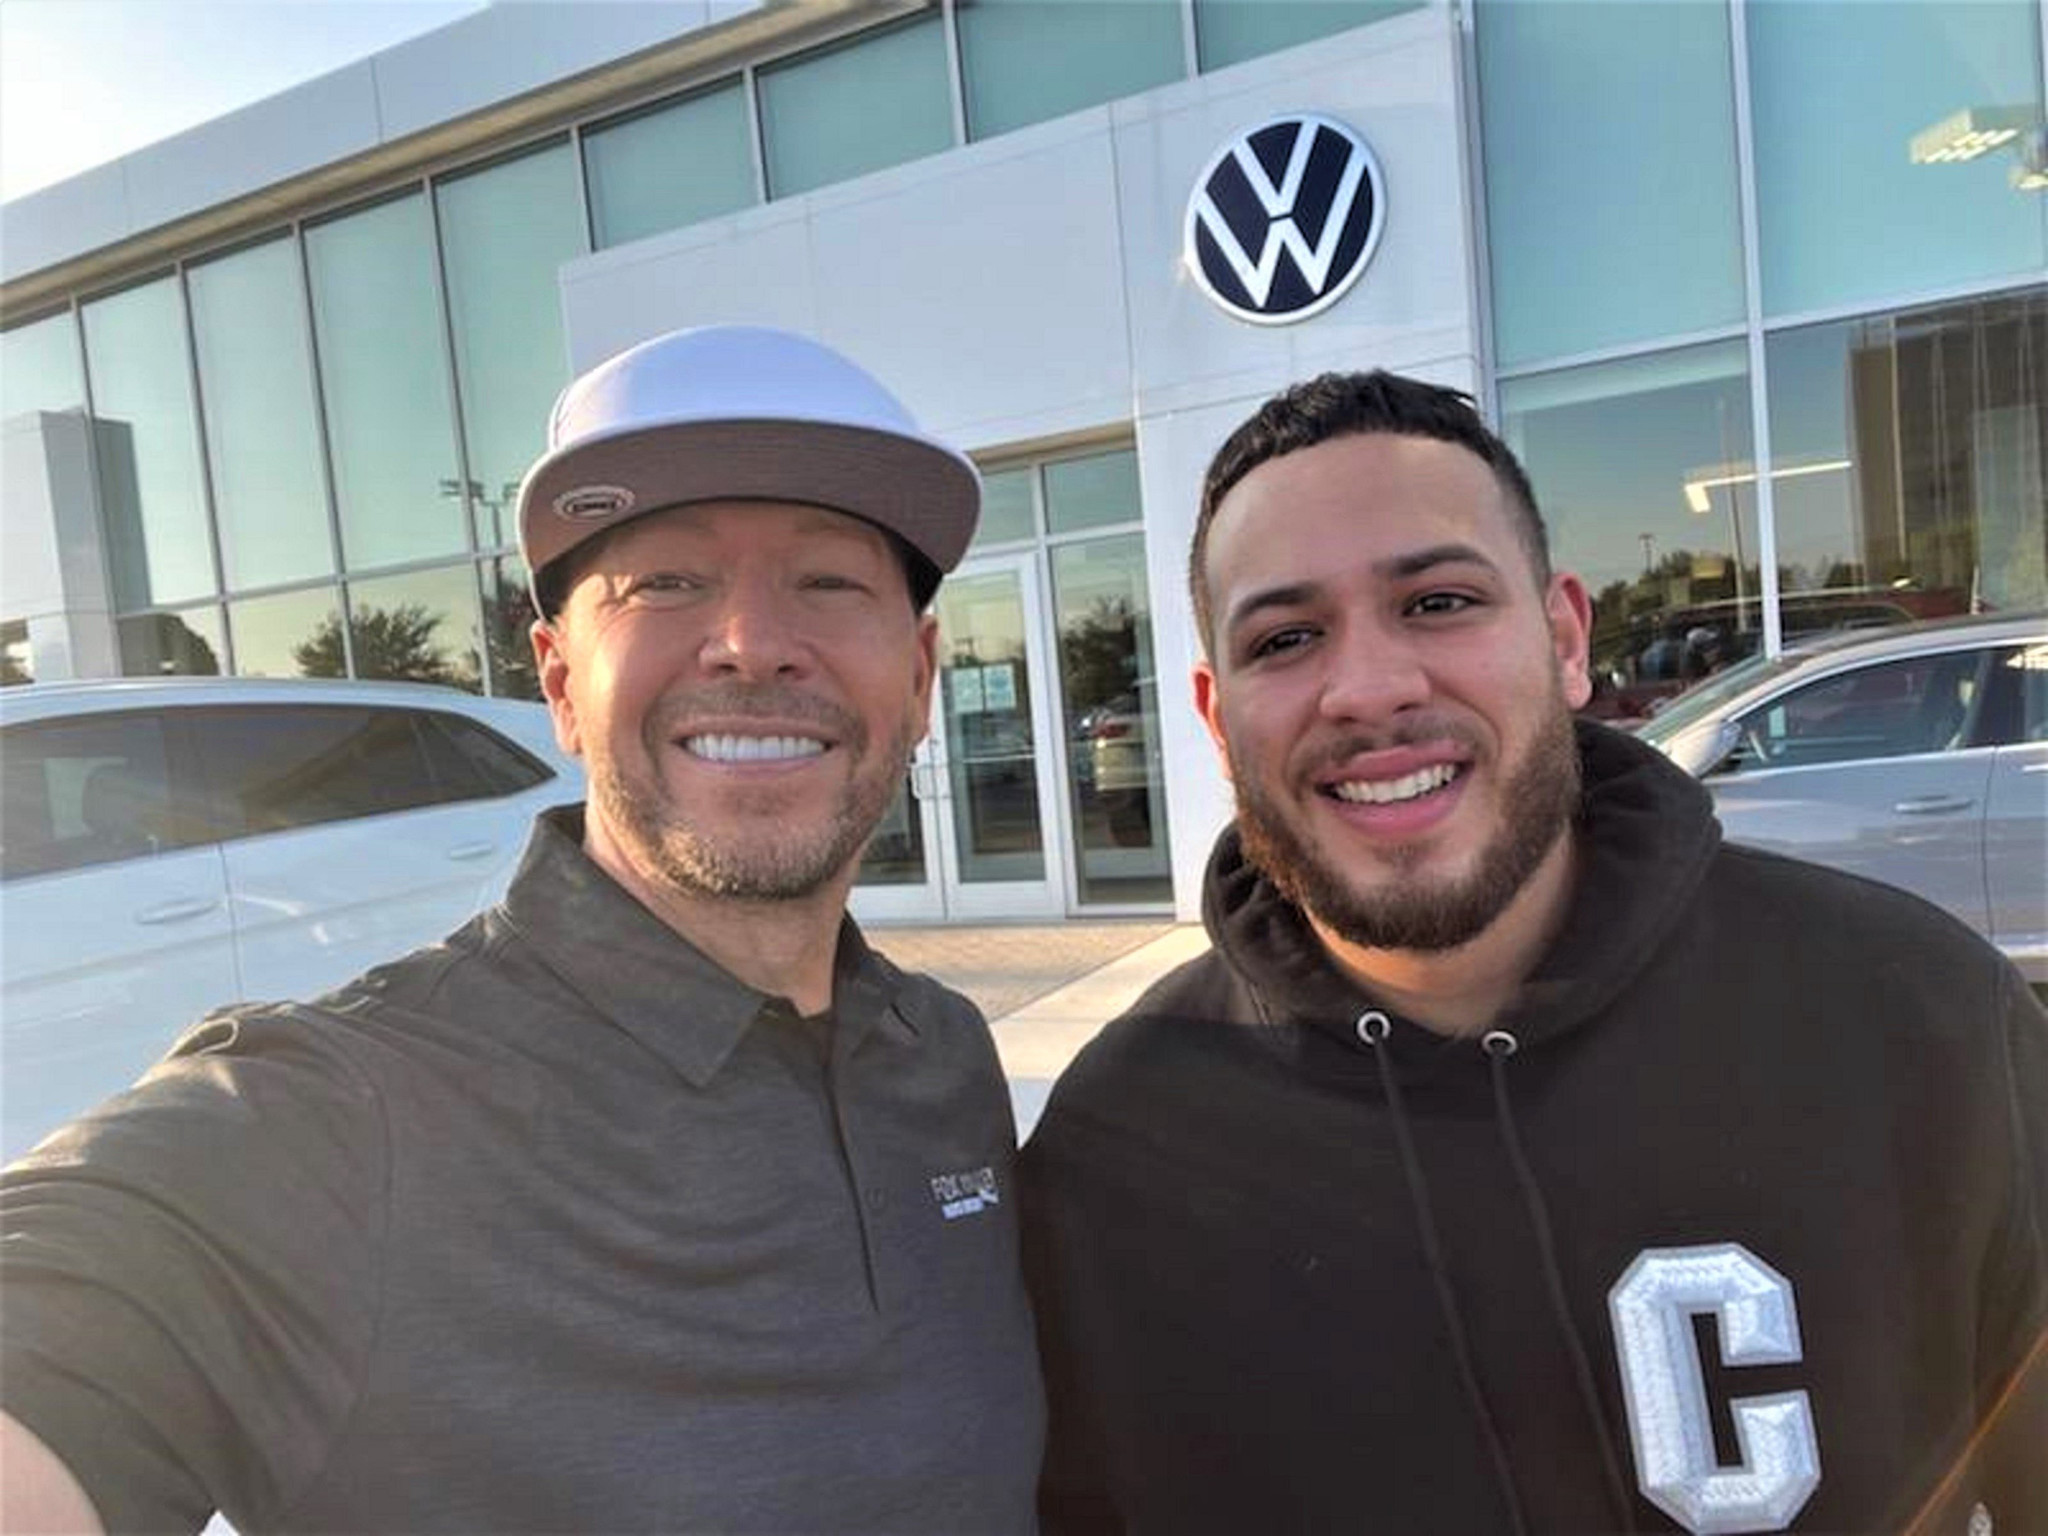 Bass Pro Shops on X: Ready to get WILD? We're teaming up with our friend  @markwahlberg and the Wahlberg family to introduce a first-of-its-kind  @Wahlburgers Wild restaurant inside the iconic Bass Pro